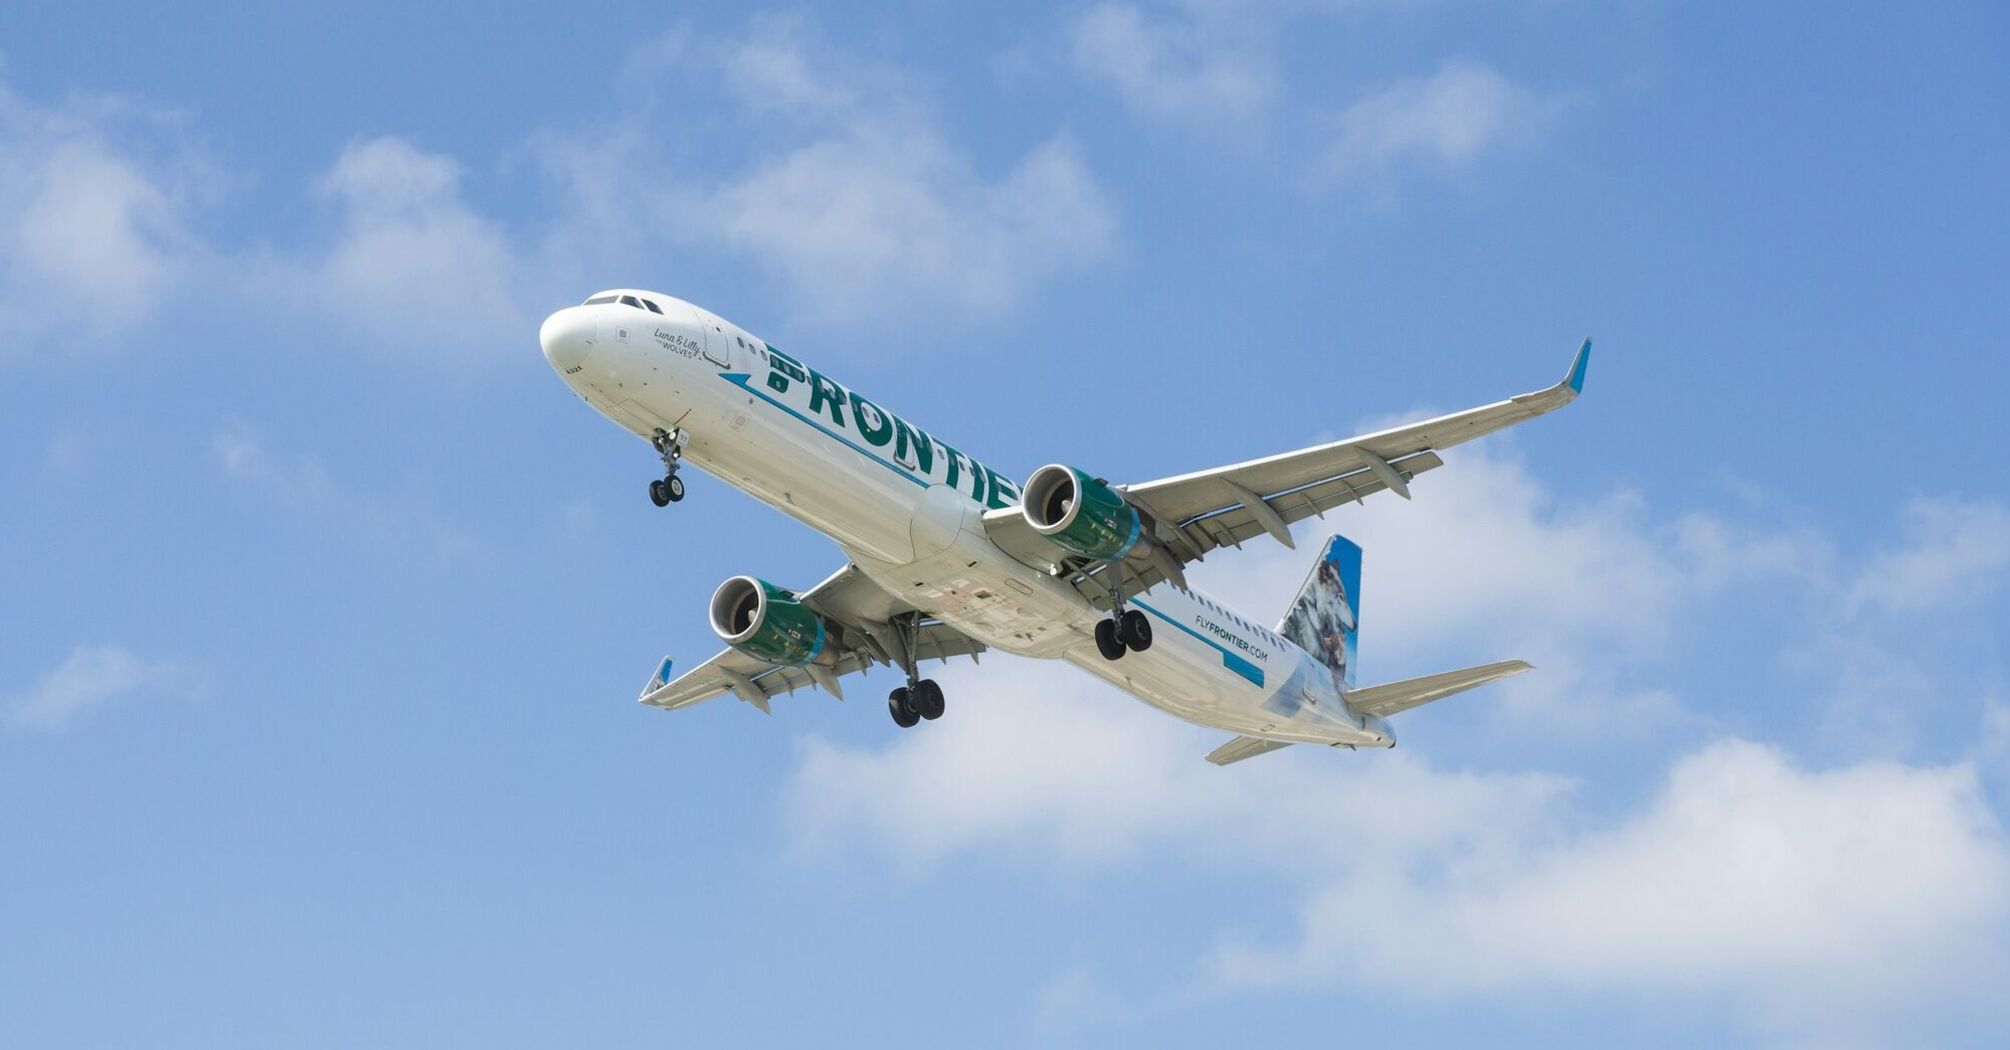 Frontier Airlines aircraft in flight